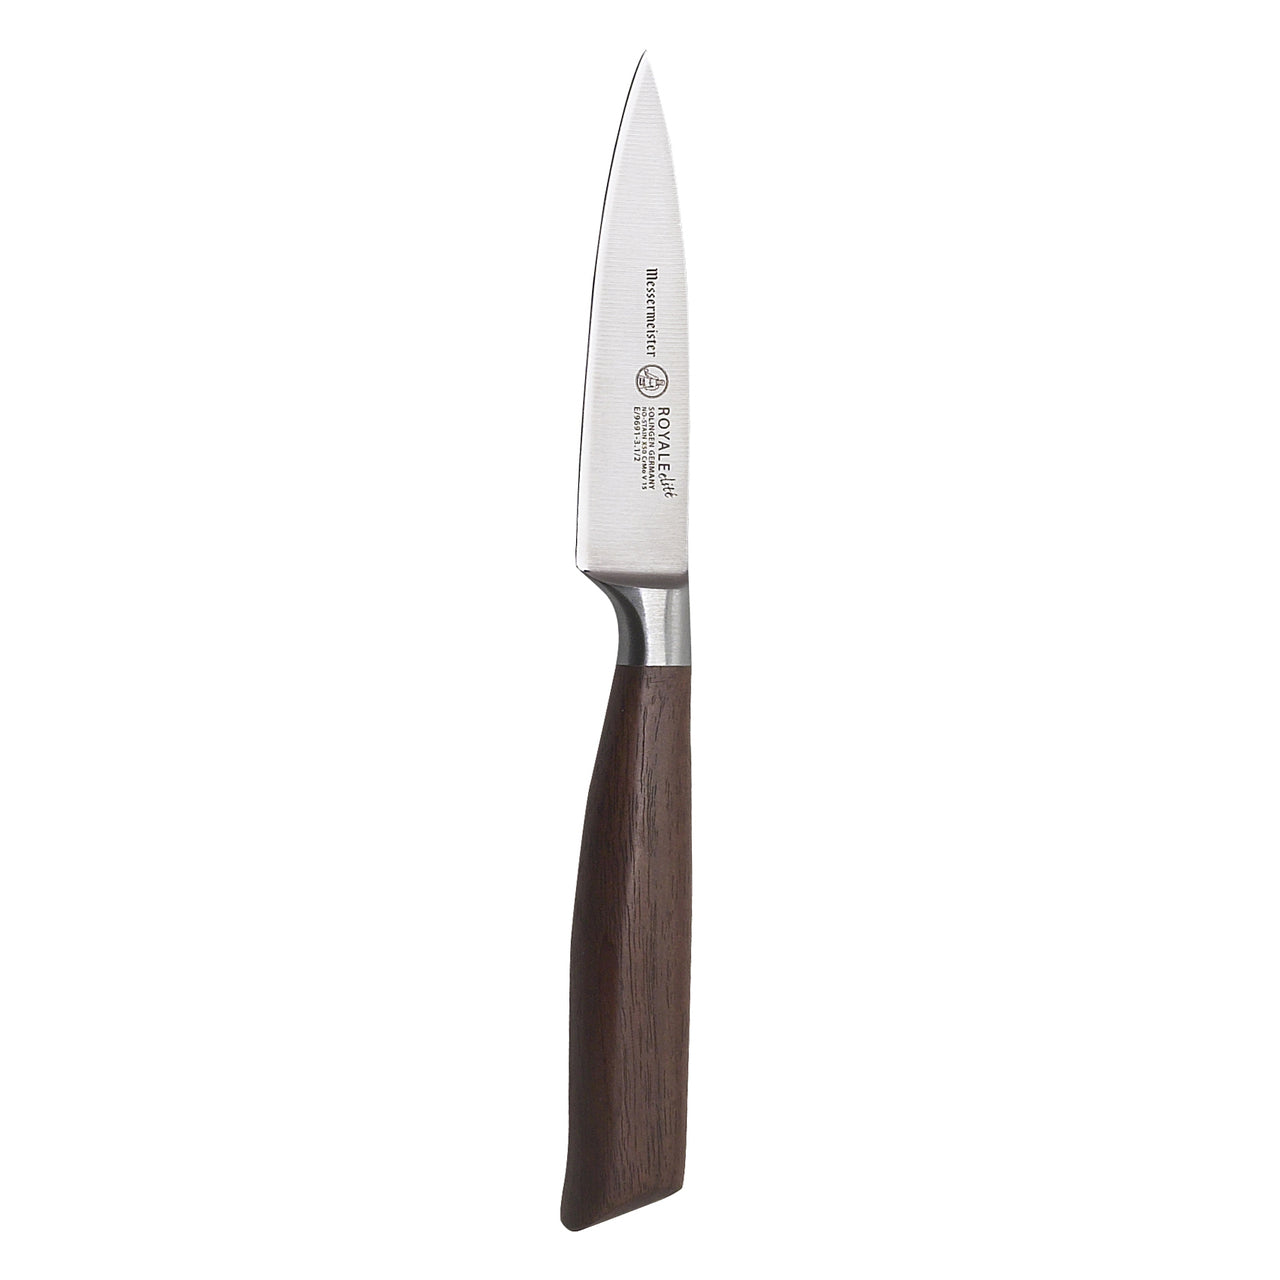 BEON.COM.AU E9691 3         Royal Elite 3.5 Inch Spear Point Paring Knife The Messermeister Royal Elite 3.5 Inch Paring Knife is your go to for a variety of tasks requiring accuracy. This kitchen knife has a fine-edge blade that is designed to be an all-purpose culinary knife, similar to a chef’s knife, exce... Messermeister at BEON.COM.AU